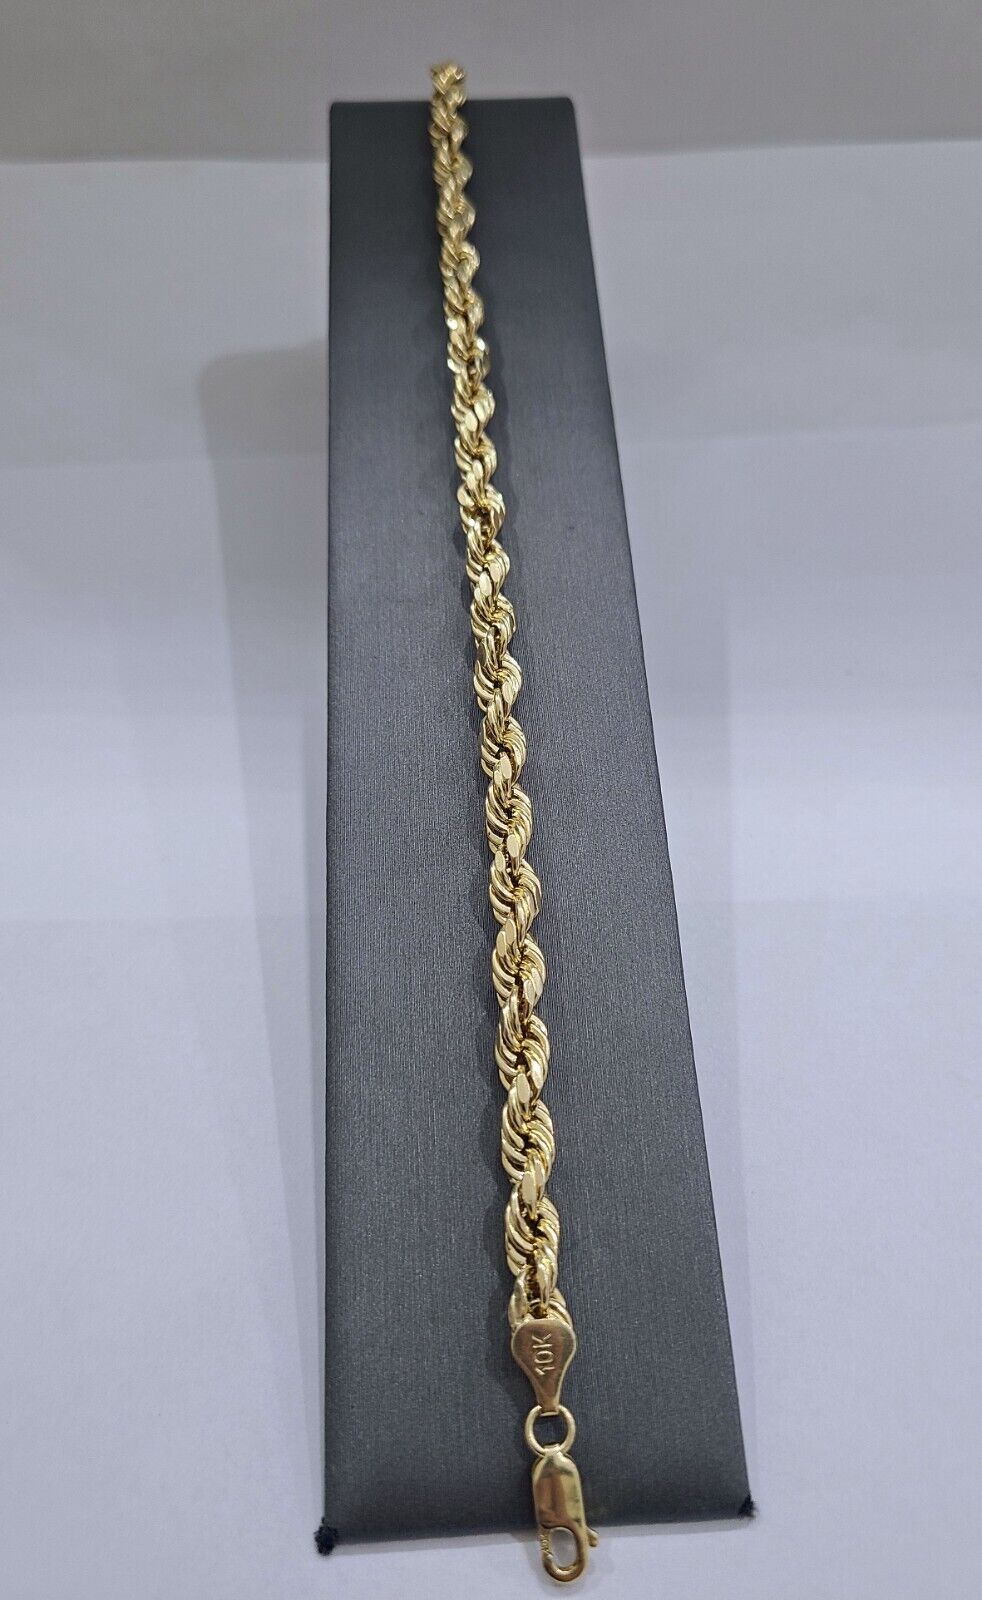 Real 10k Yellow Gold 5mm Rope Bracelet 9'' inch 10kt Unisex